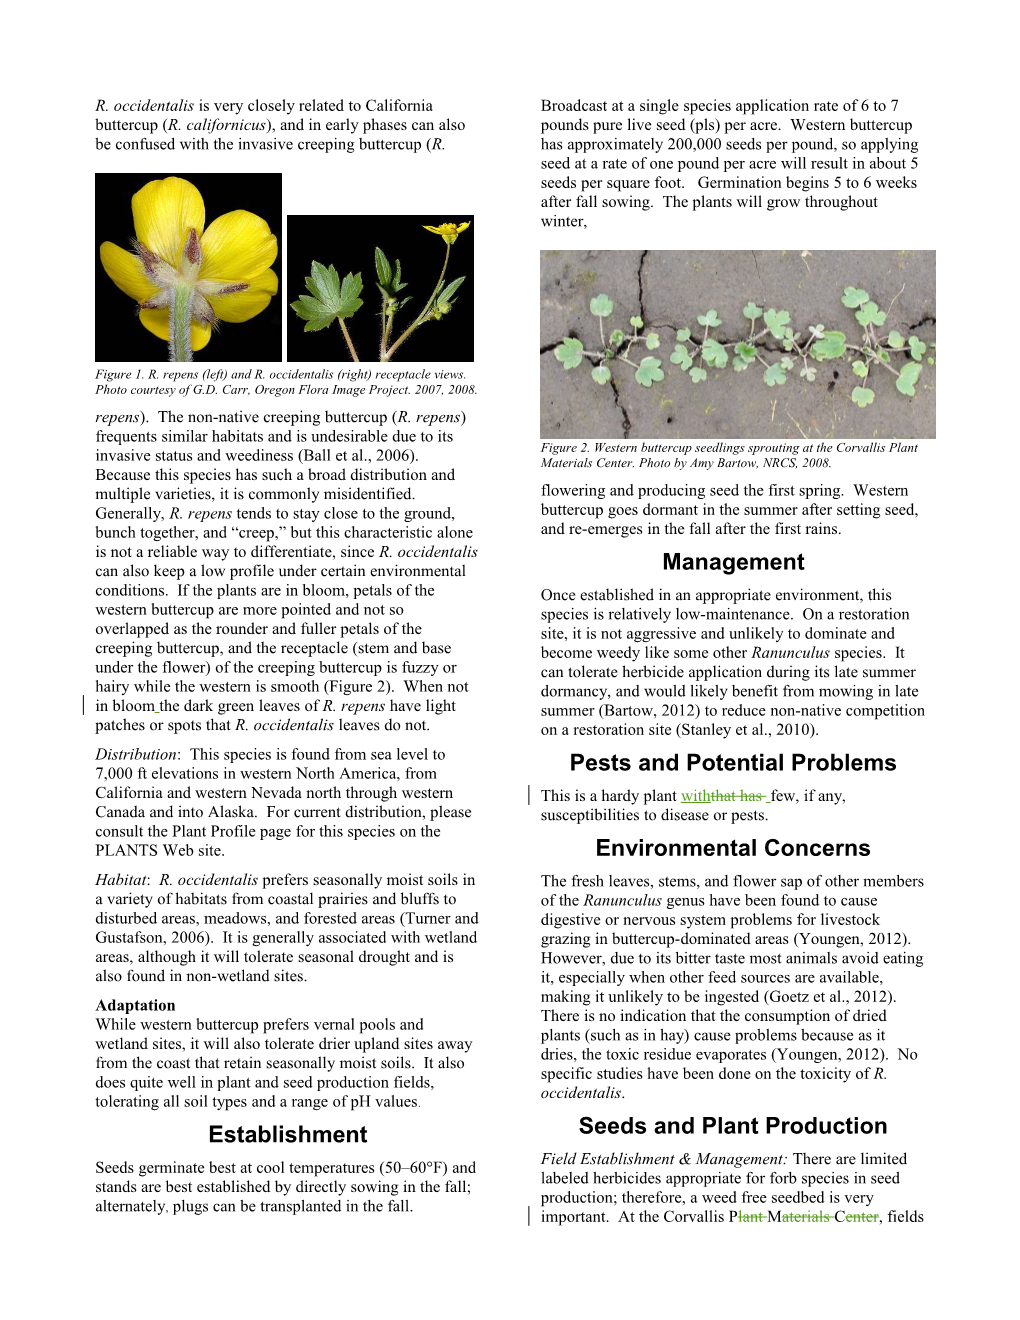 Western Buttercup (Ranunculus Occidentalis) Plant Guide